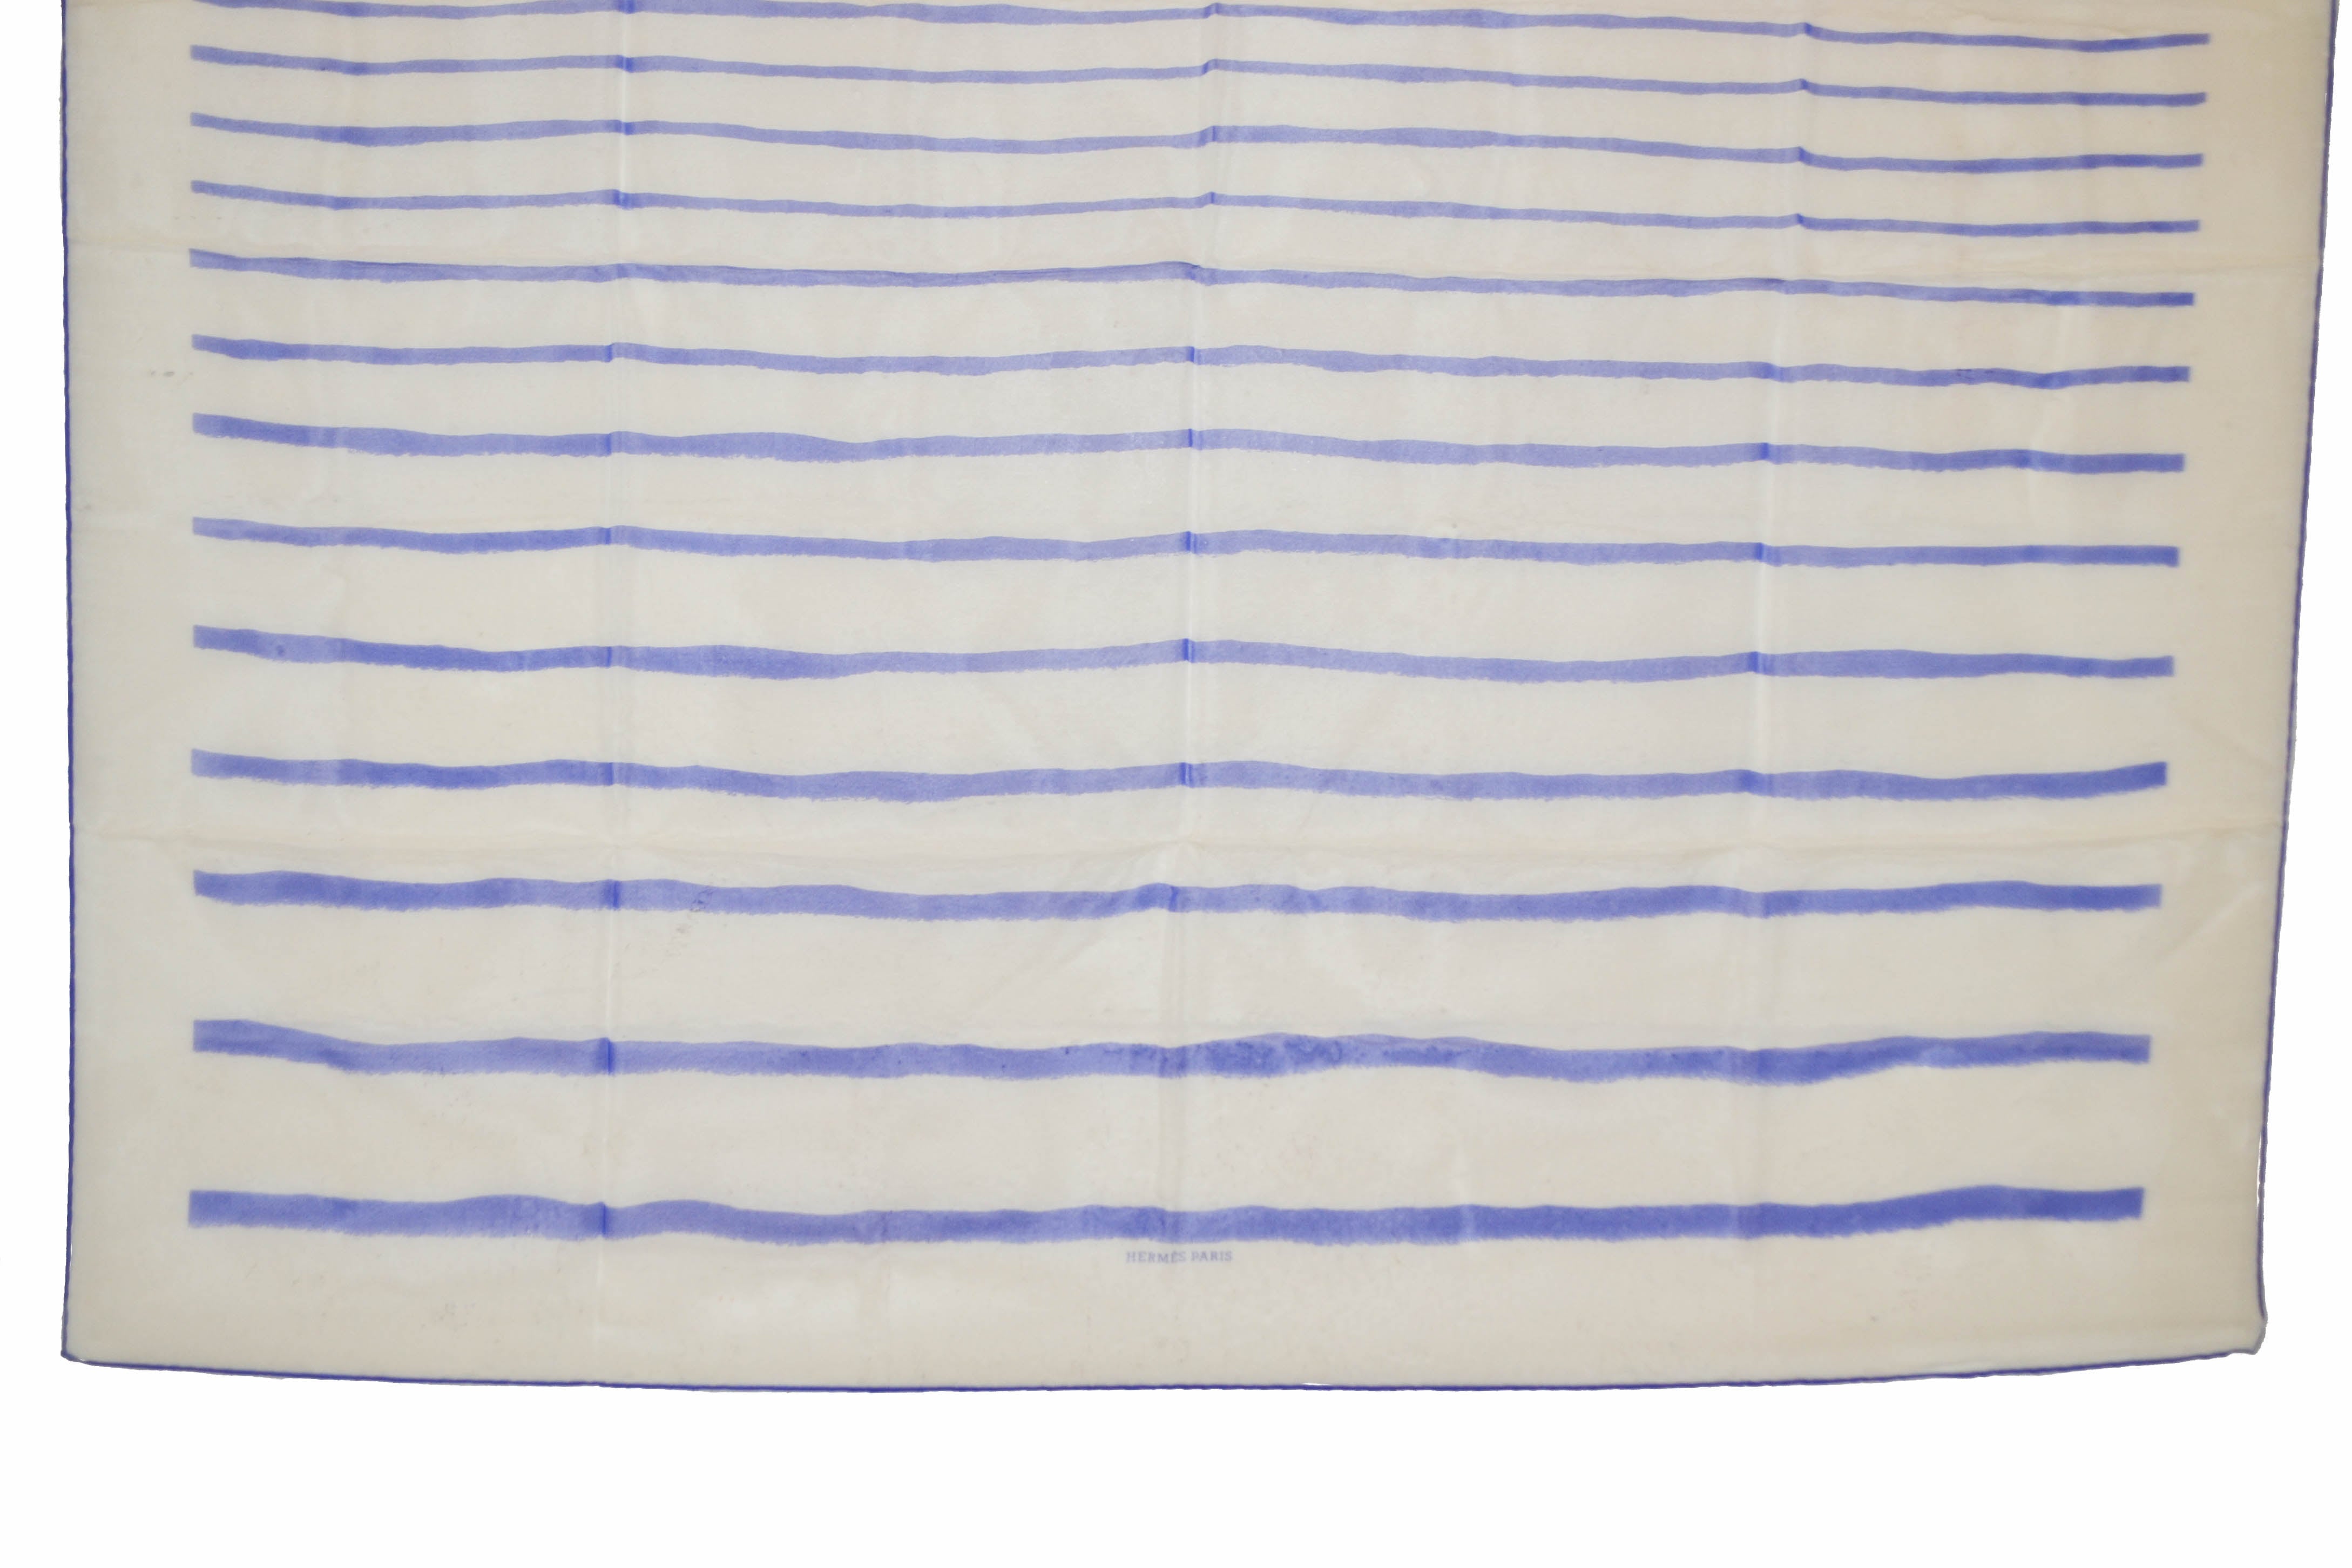 Authentic Hermes White with Blue Lines Print Design Mousseline 100% Silk Scarf 36"